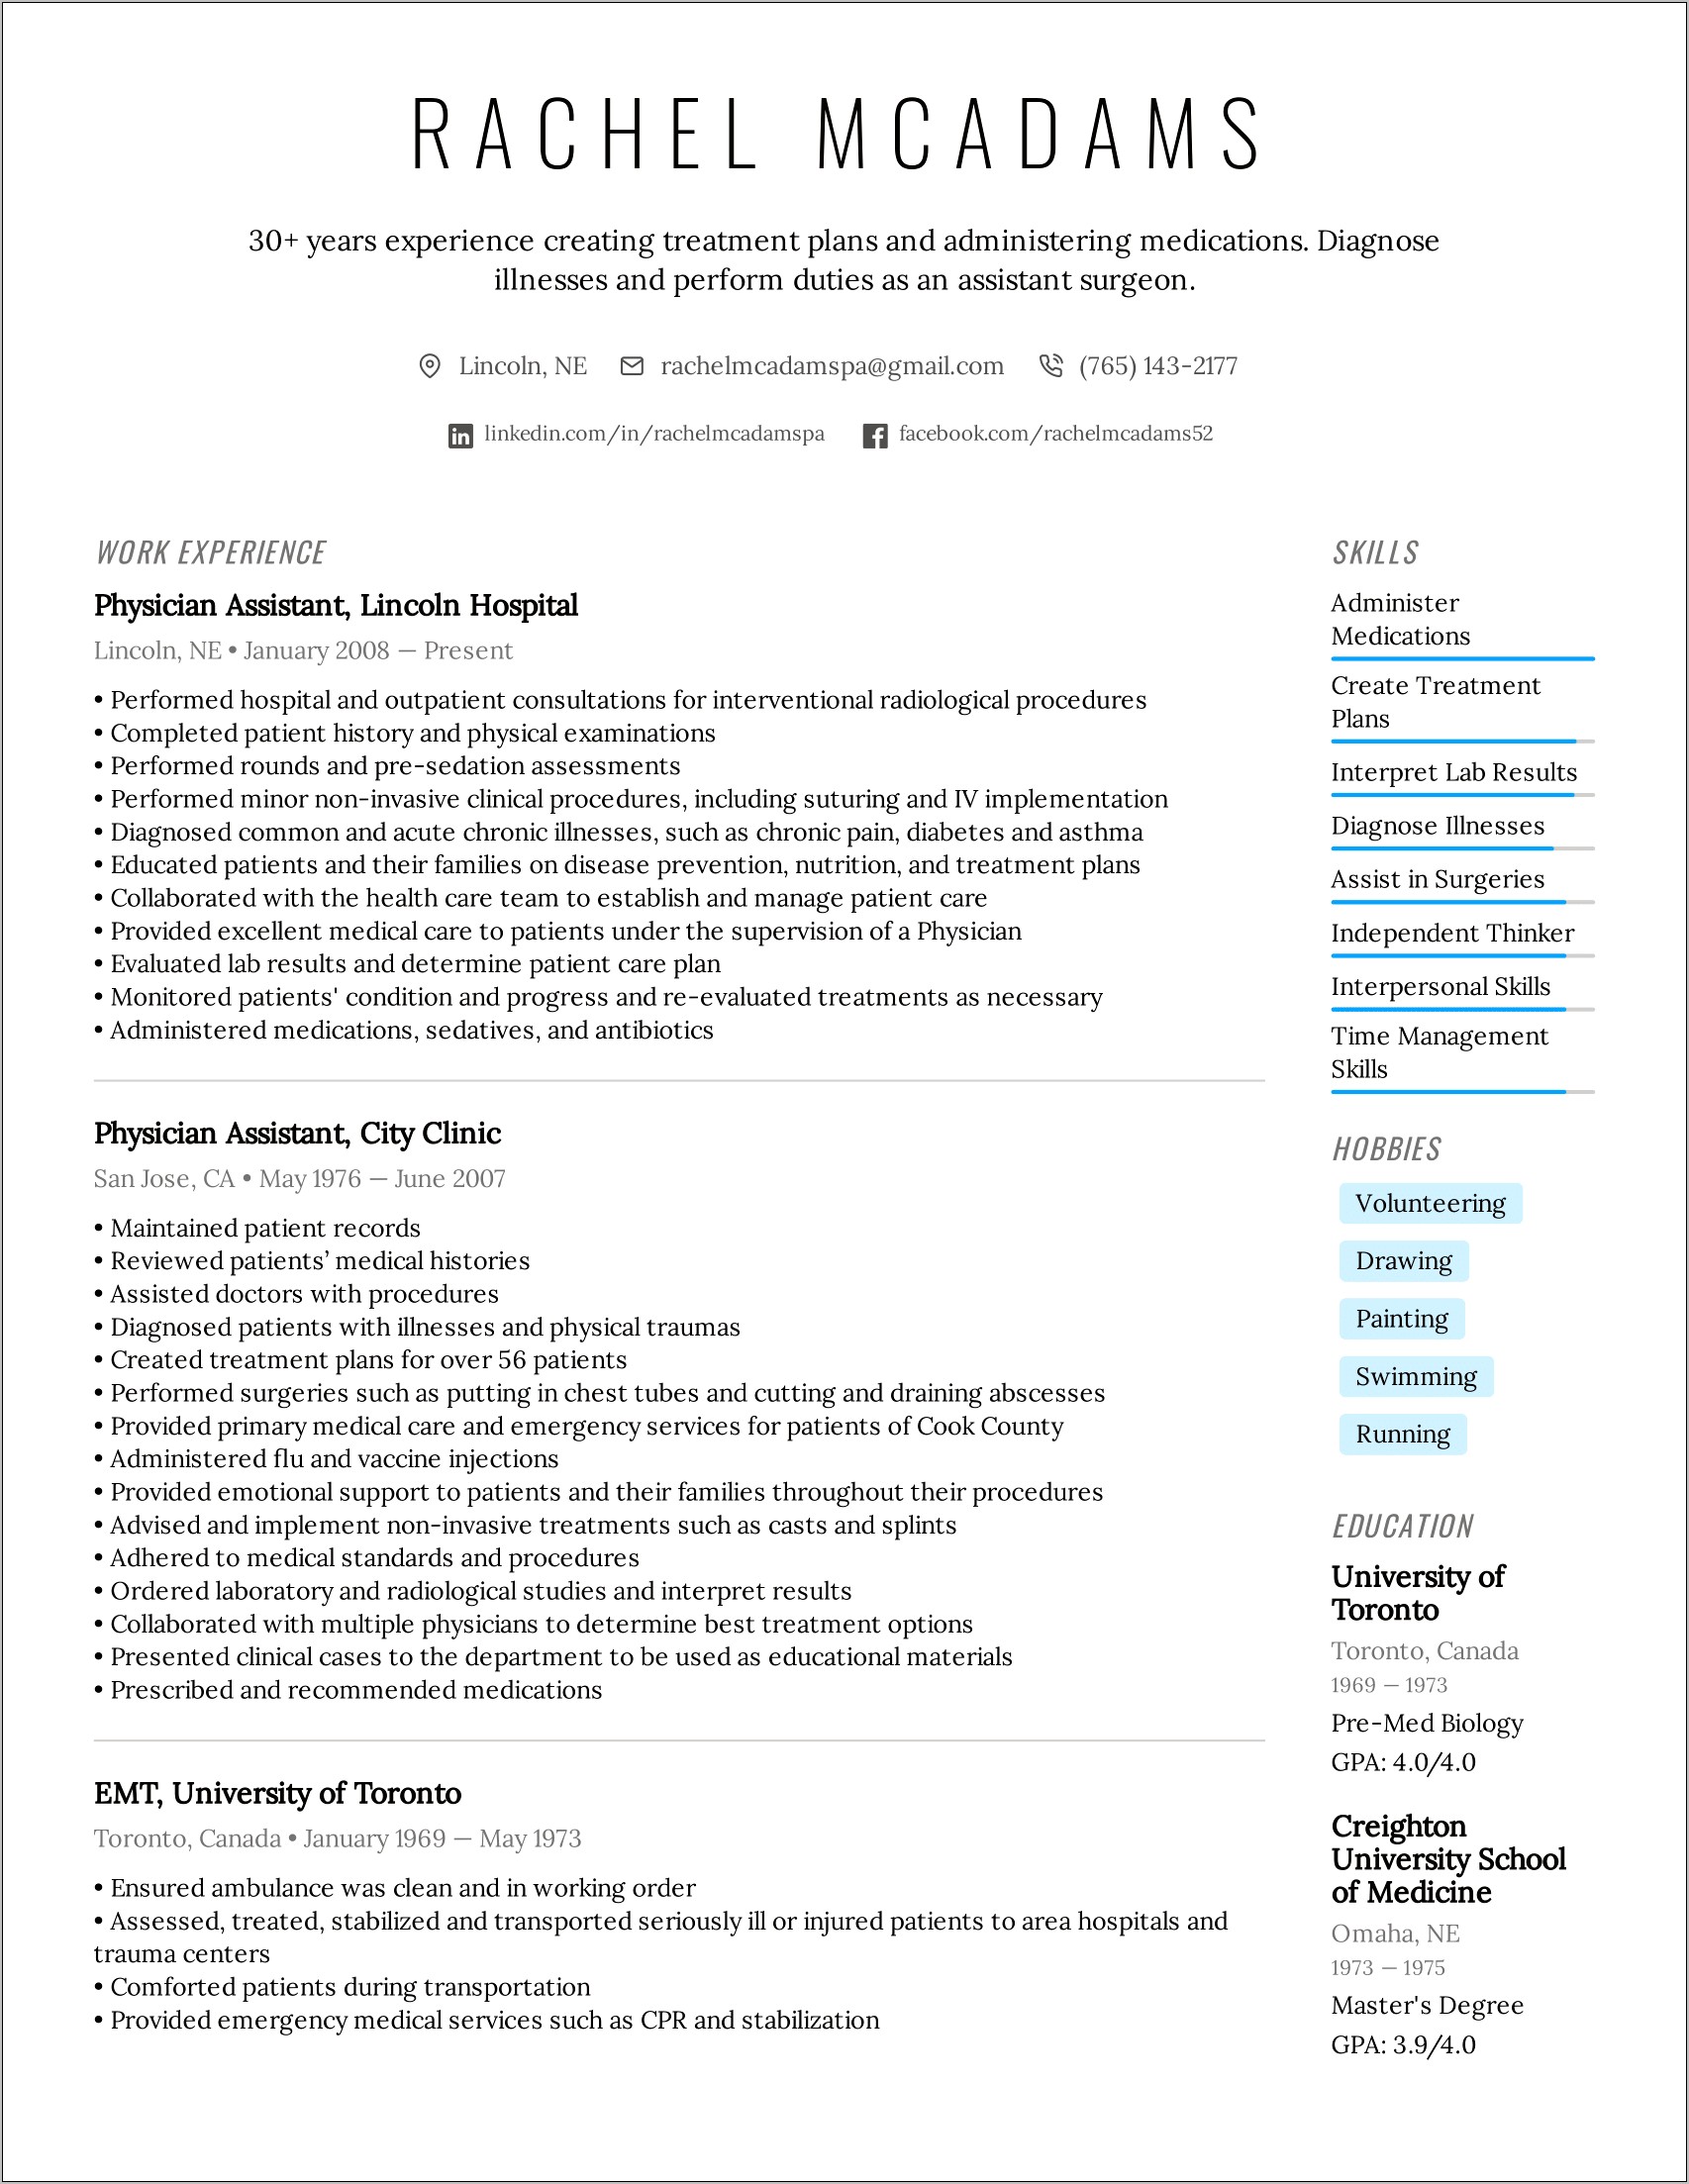 Listing Education On A Resume Examples